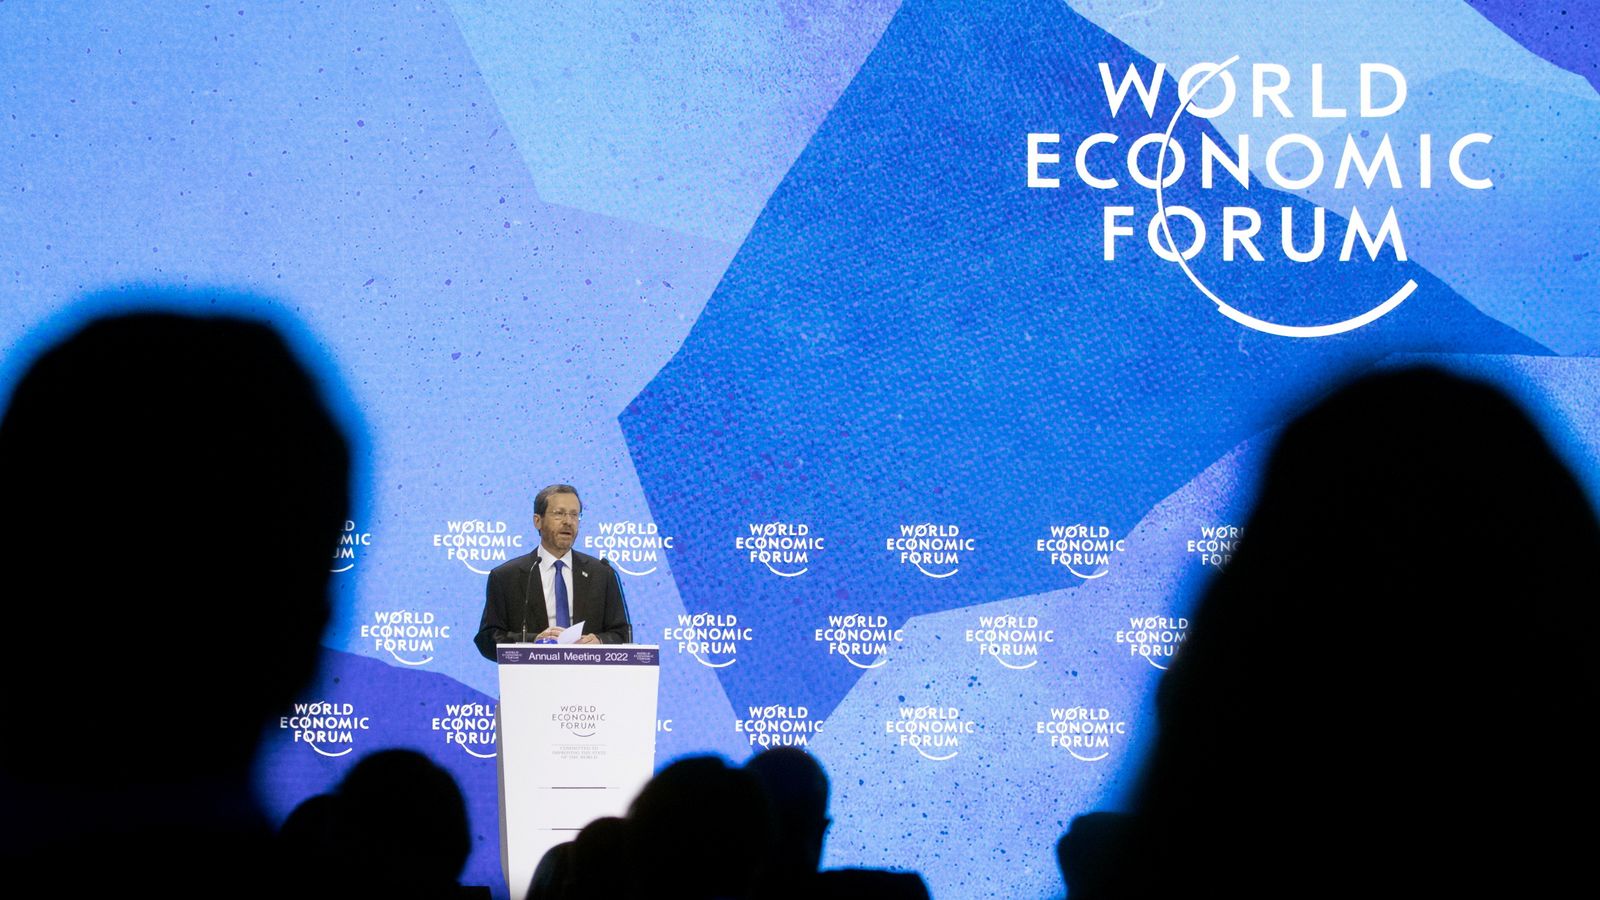 What is Davos and what happens at the World Economic Forum meeting?